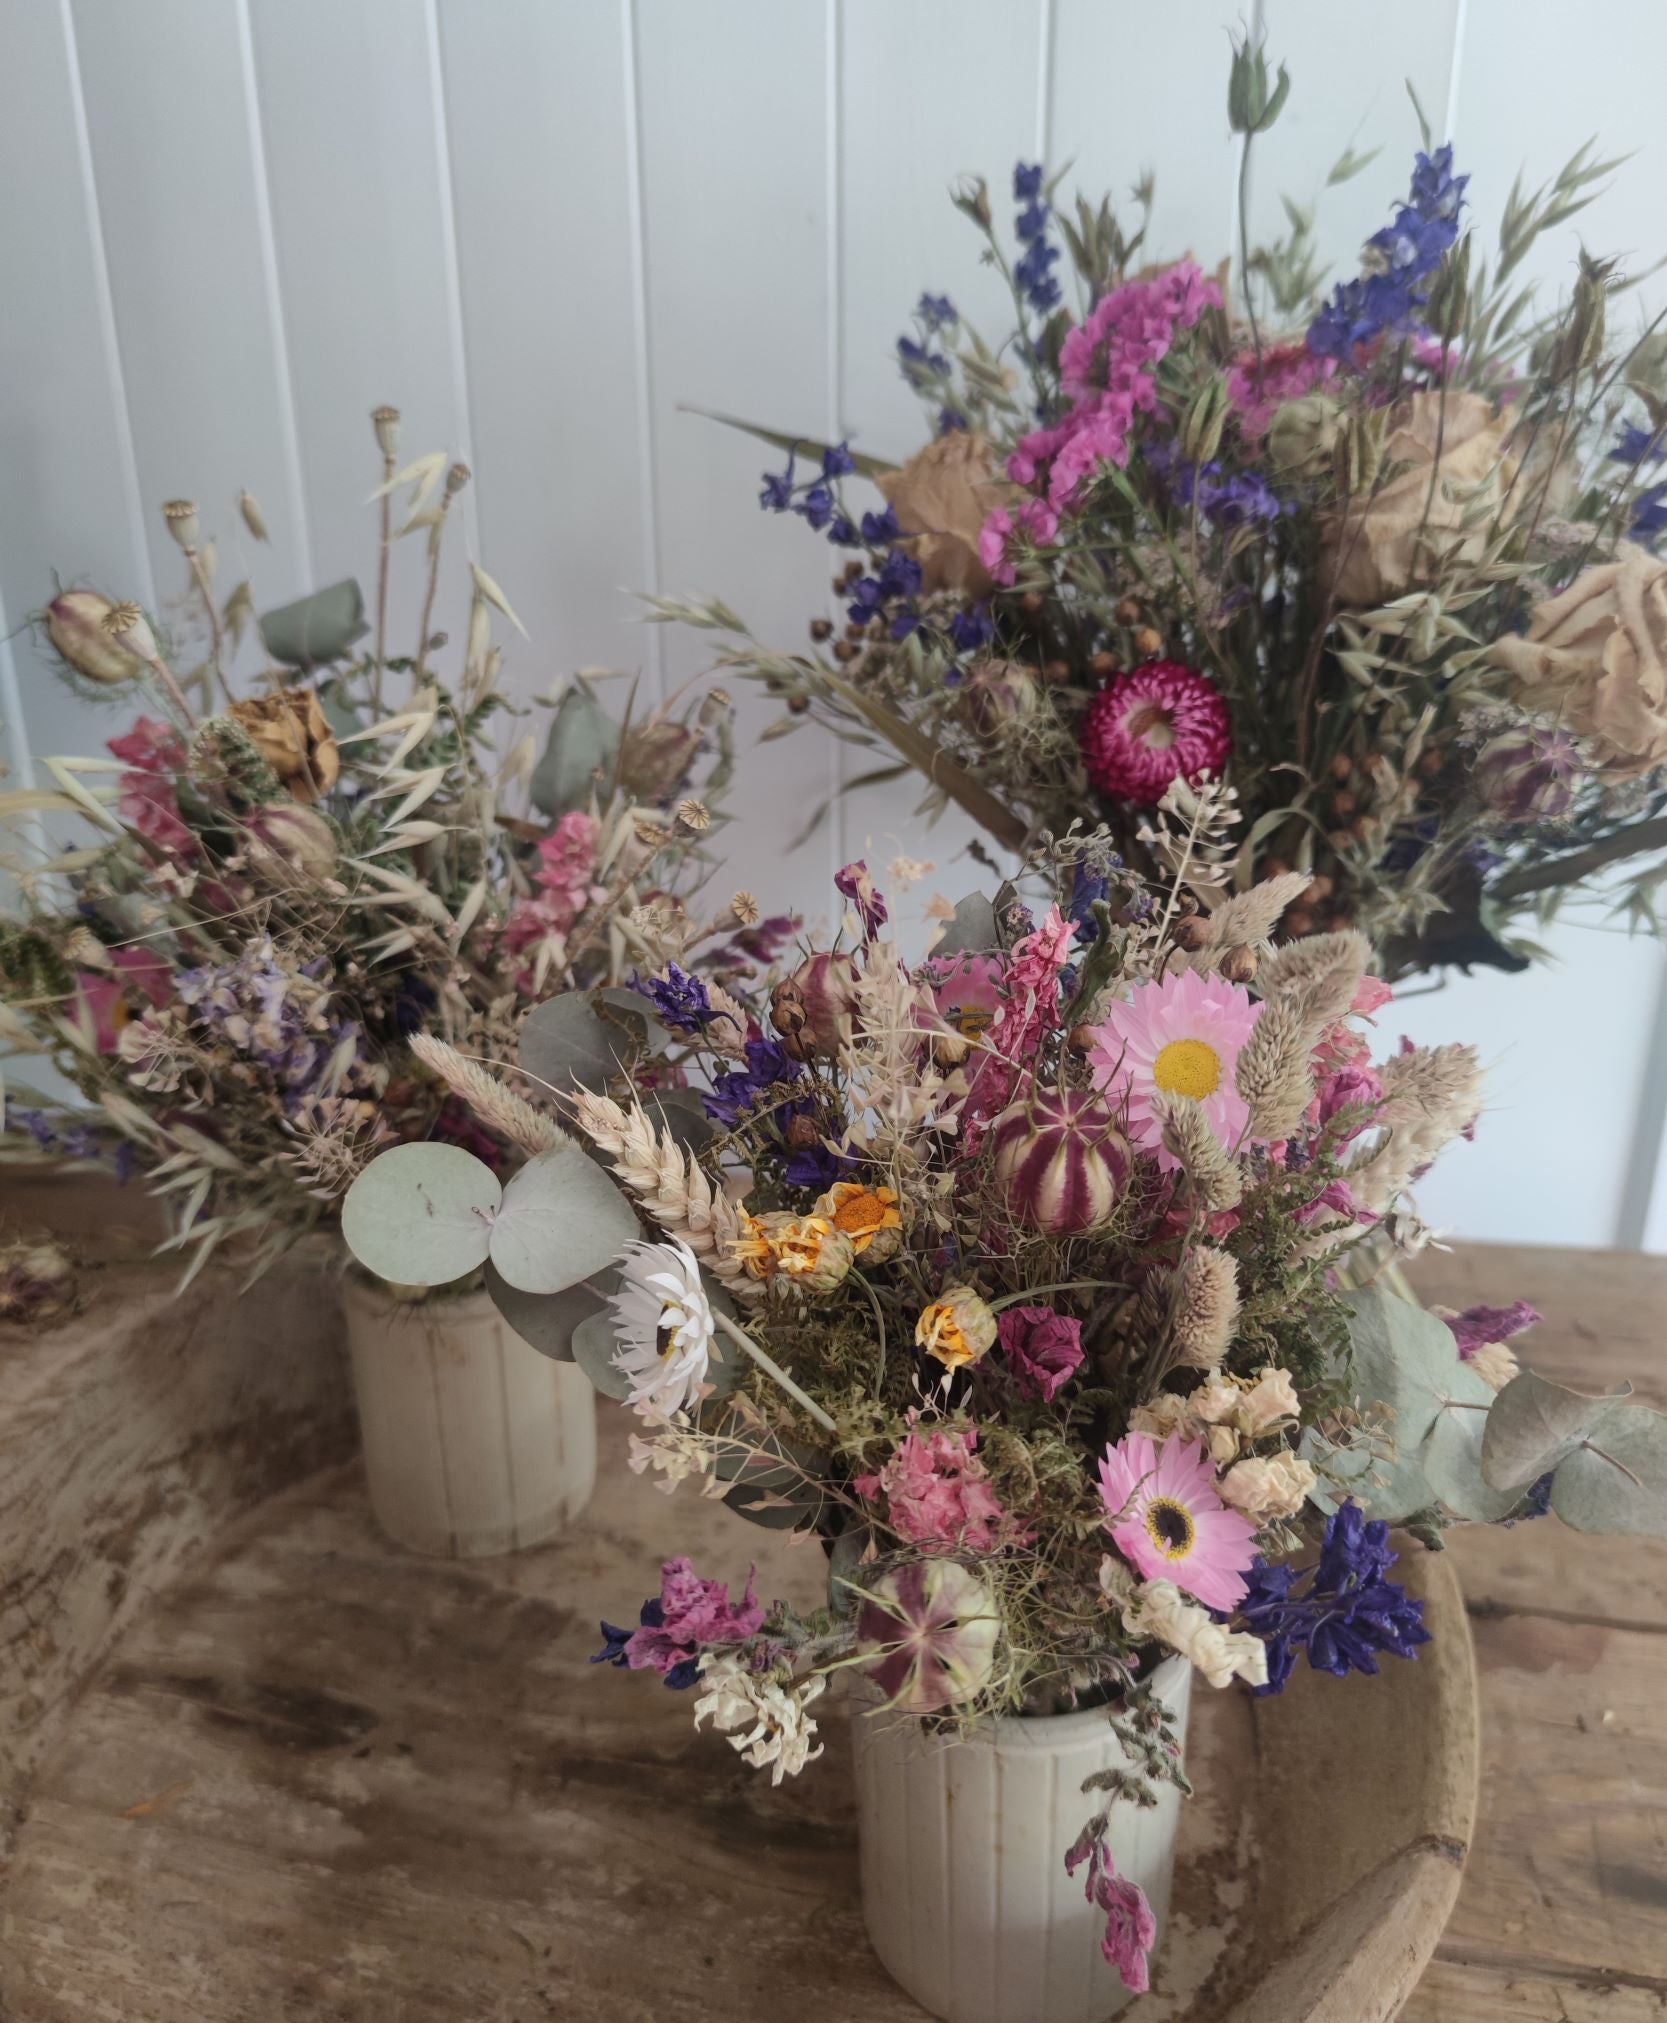 Hand Tied Bouquets of natural, dried flowers